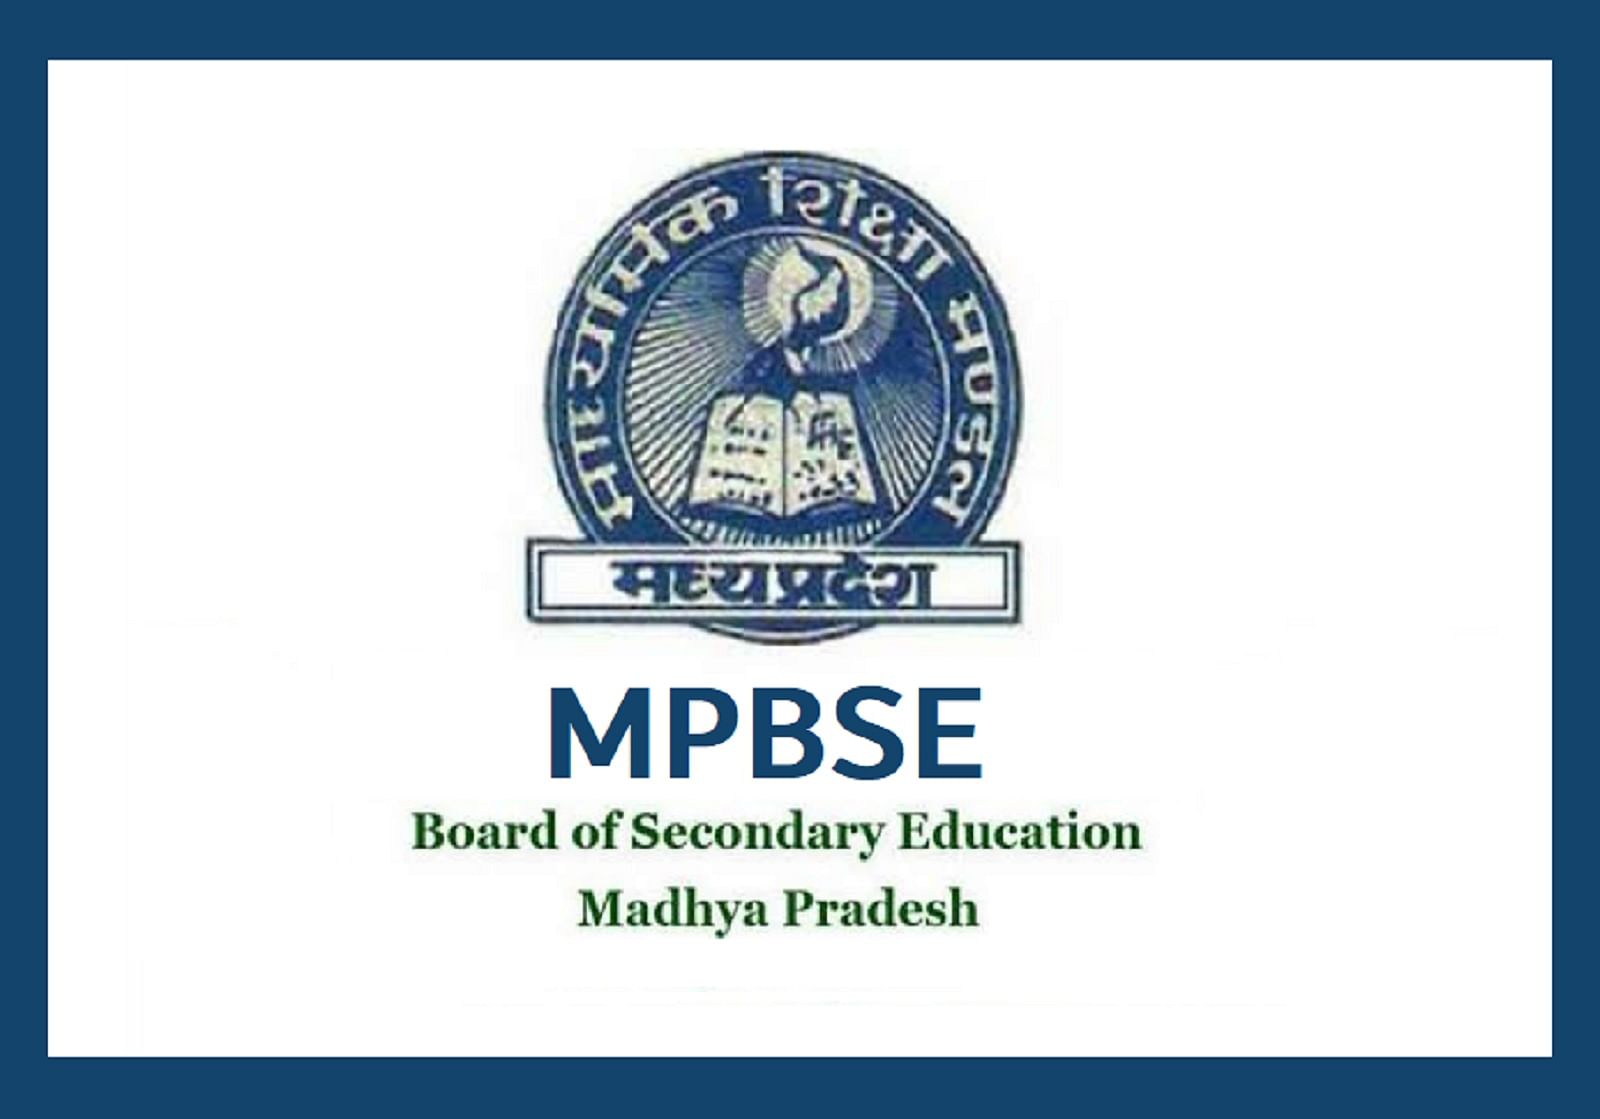 MP Board Result 2022 Soon: Check Last Year Highlights and Official Websites List Here